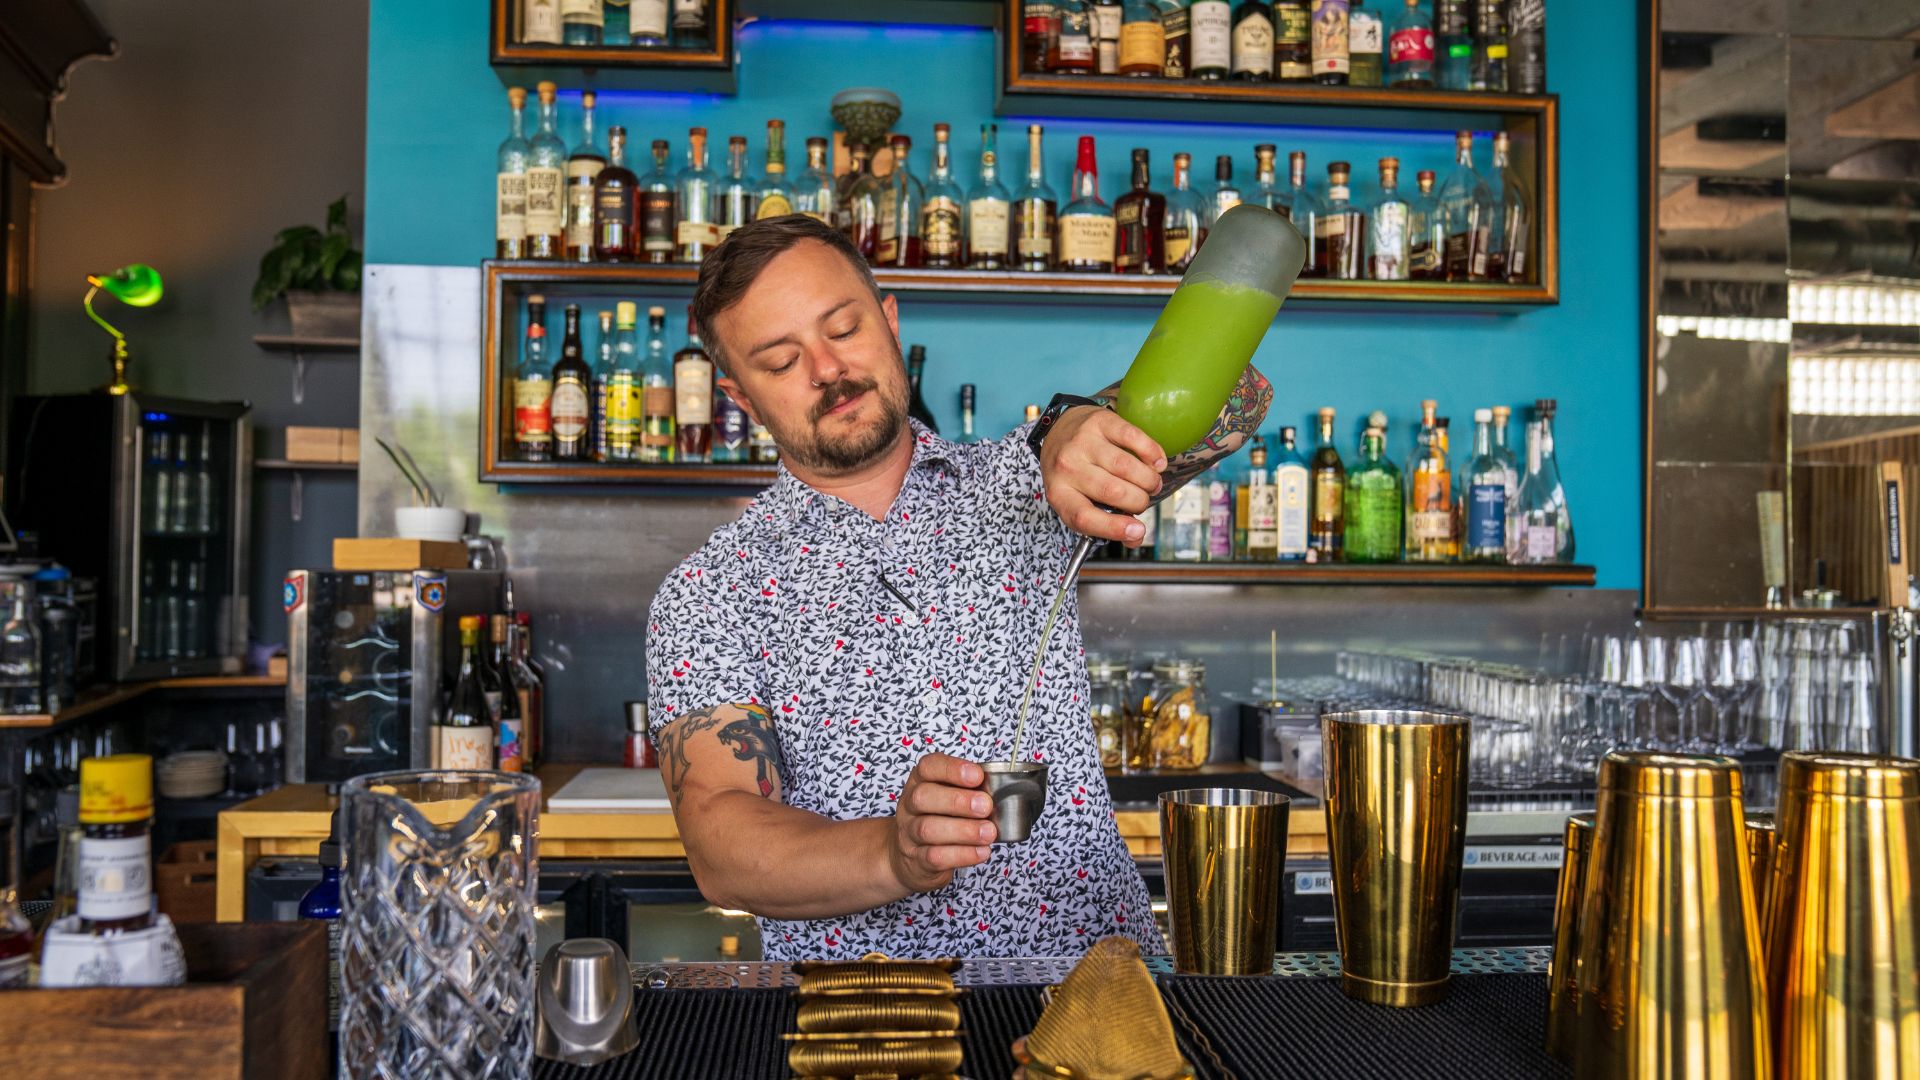 Corey Moszer mixes drinks behind the bar at The Lucky Accomplice.